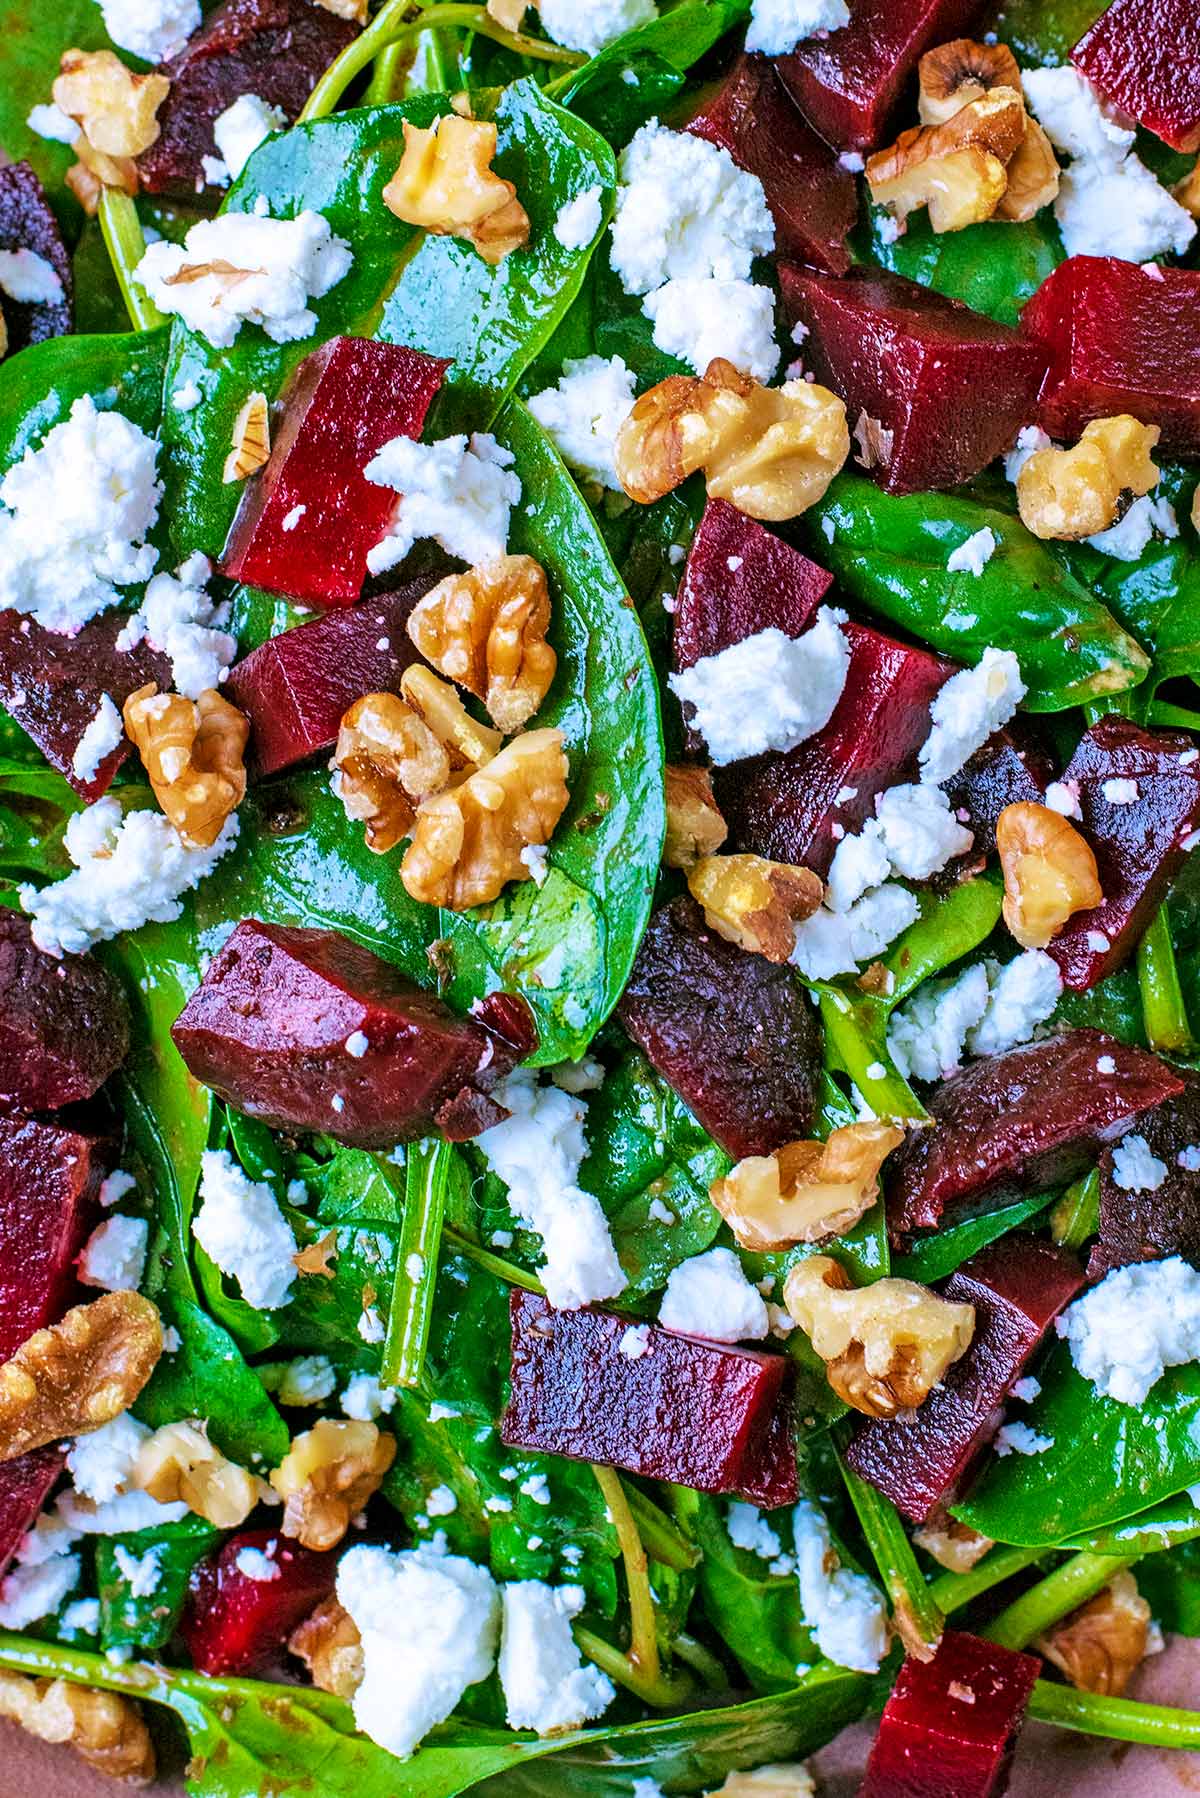 Salad leaves topped with chopped beetroot, goats cheese and walnuts.